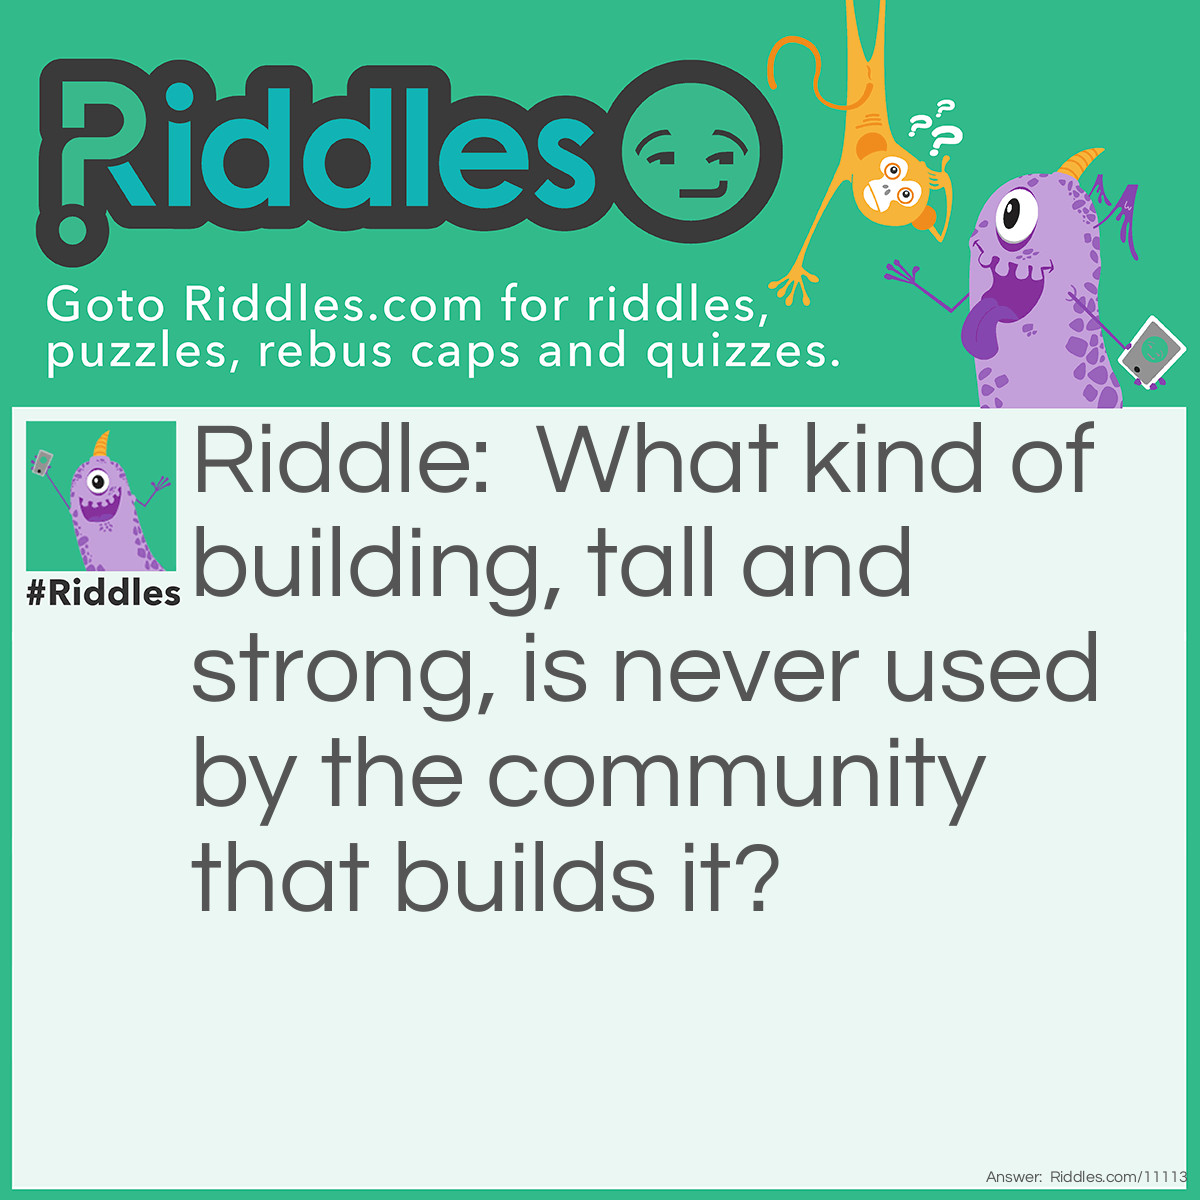 Riddle: What kind of building, tall and strong, is never used by the community that builds it? Answer: A lighthouse. It's sole use it to warn ships, not to help the town that built it.